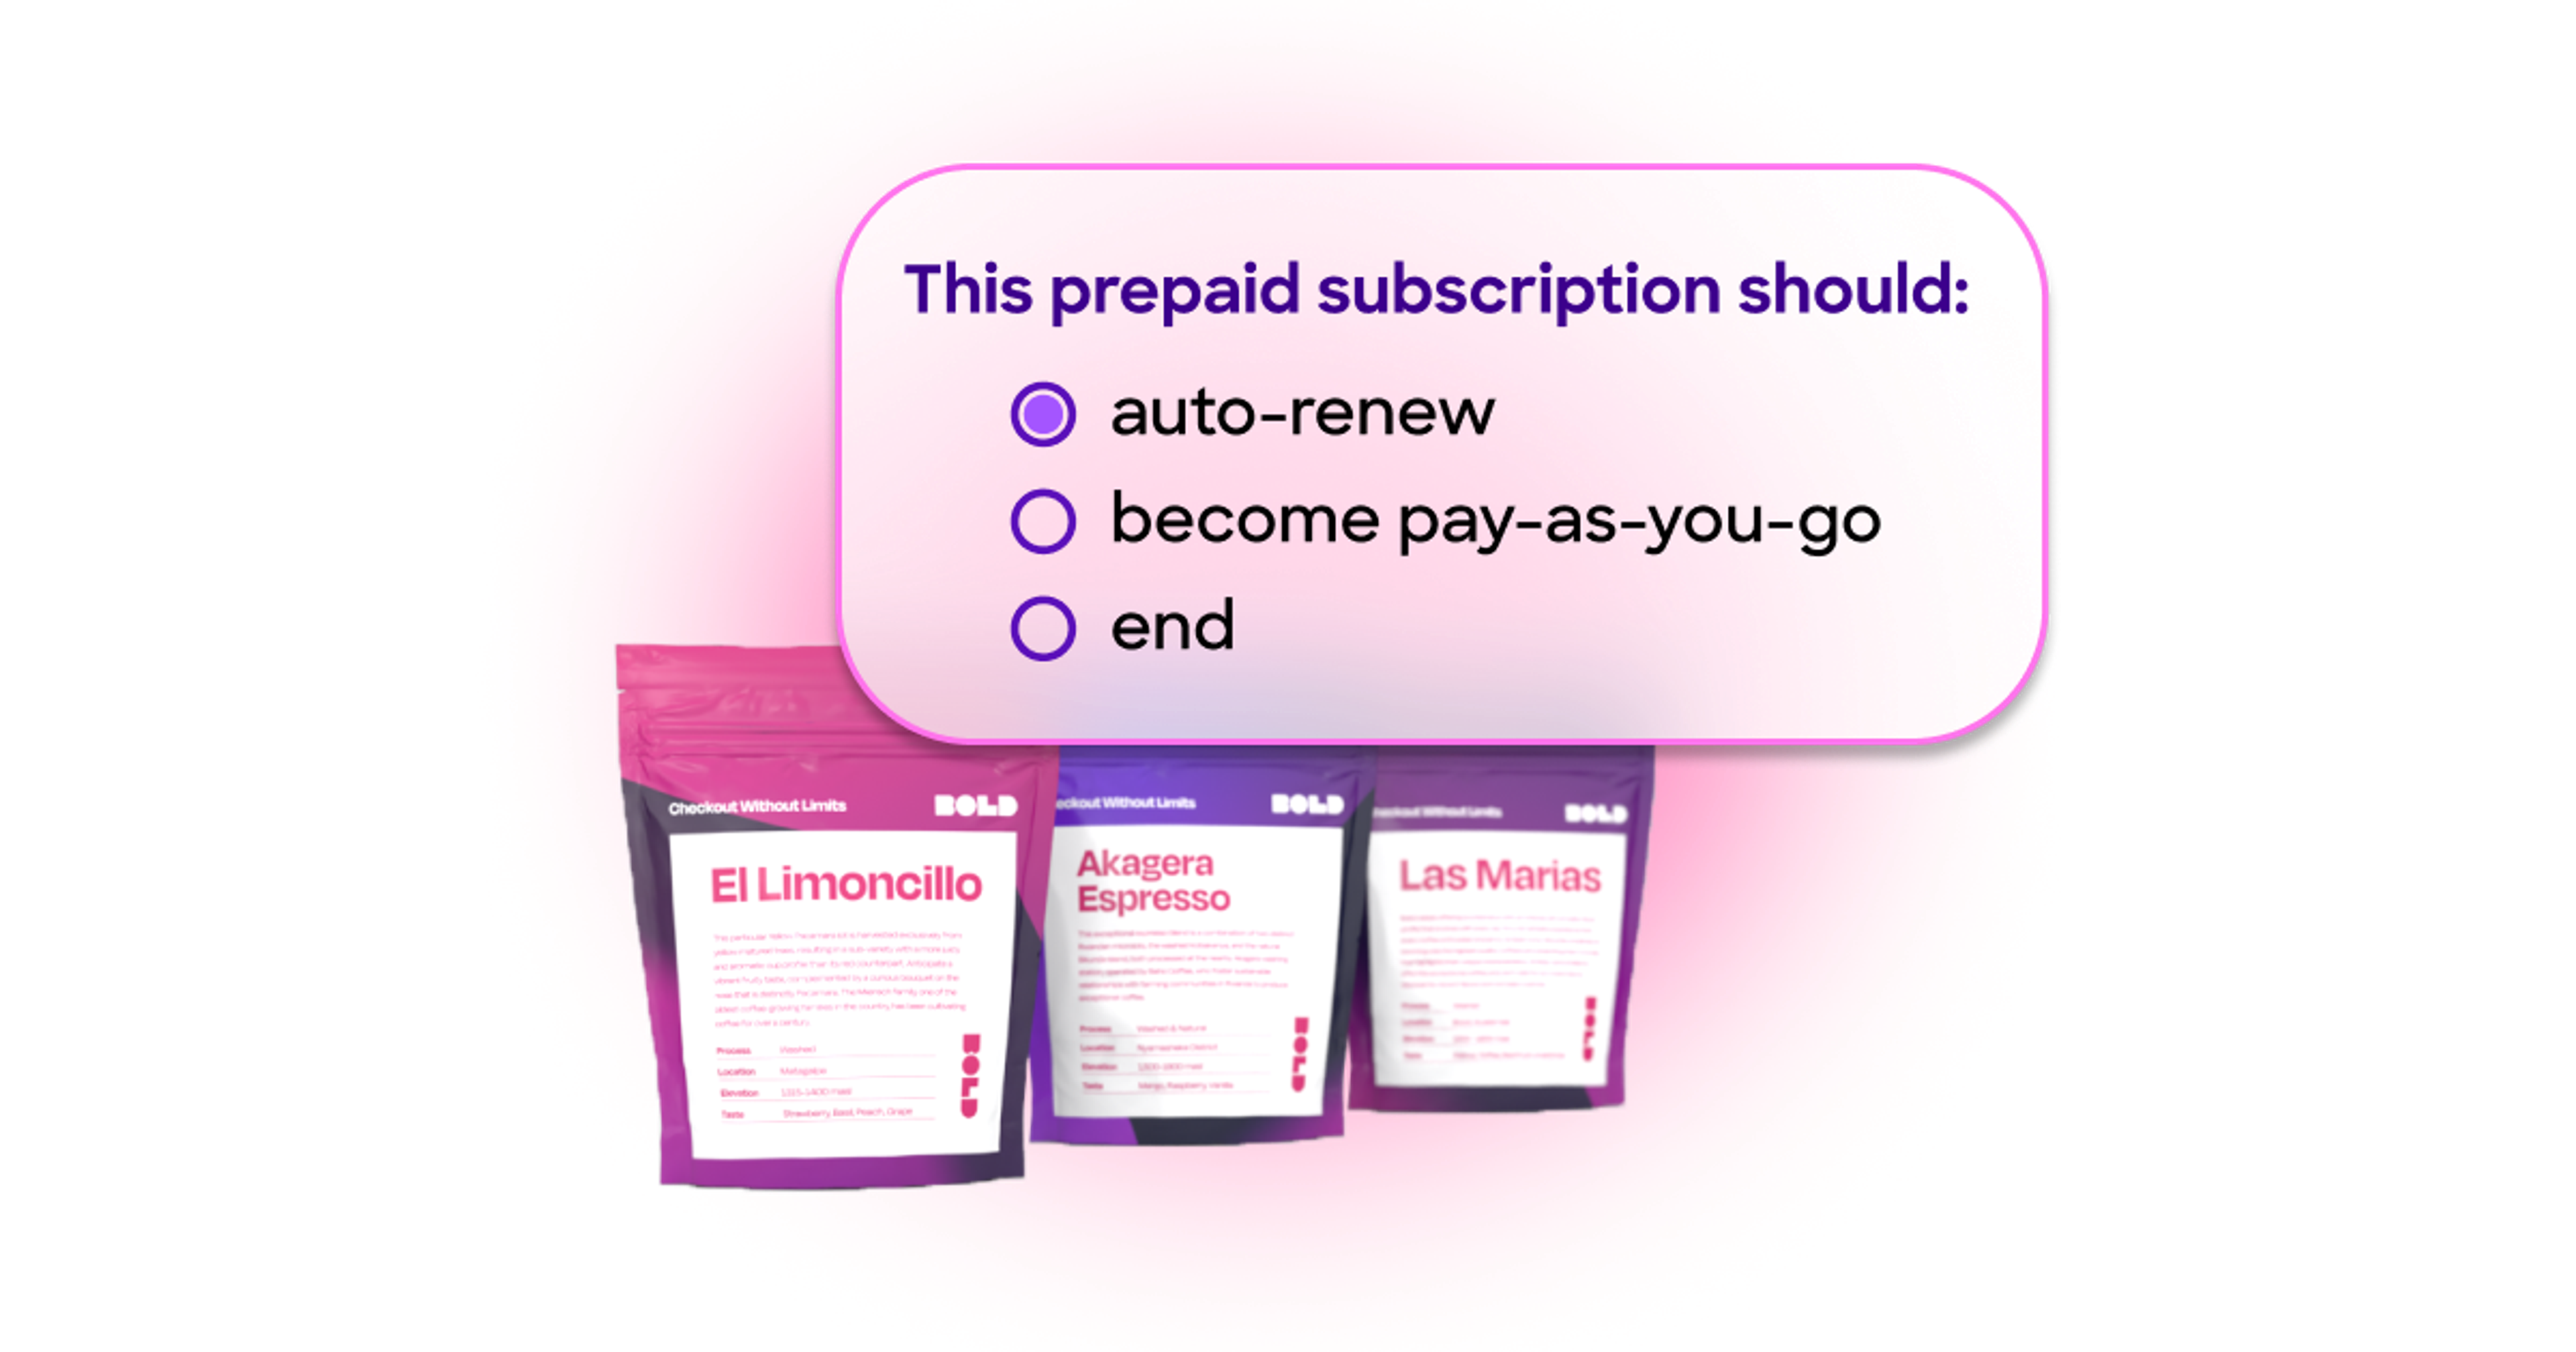 Prepaid subscriptions, done right